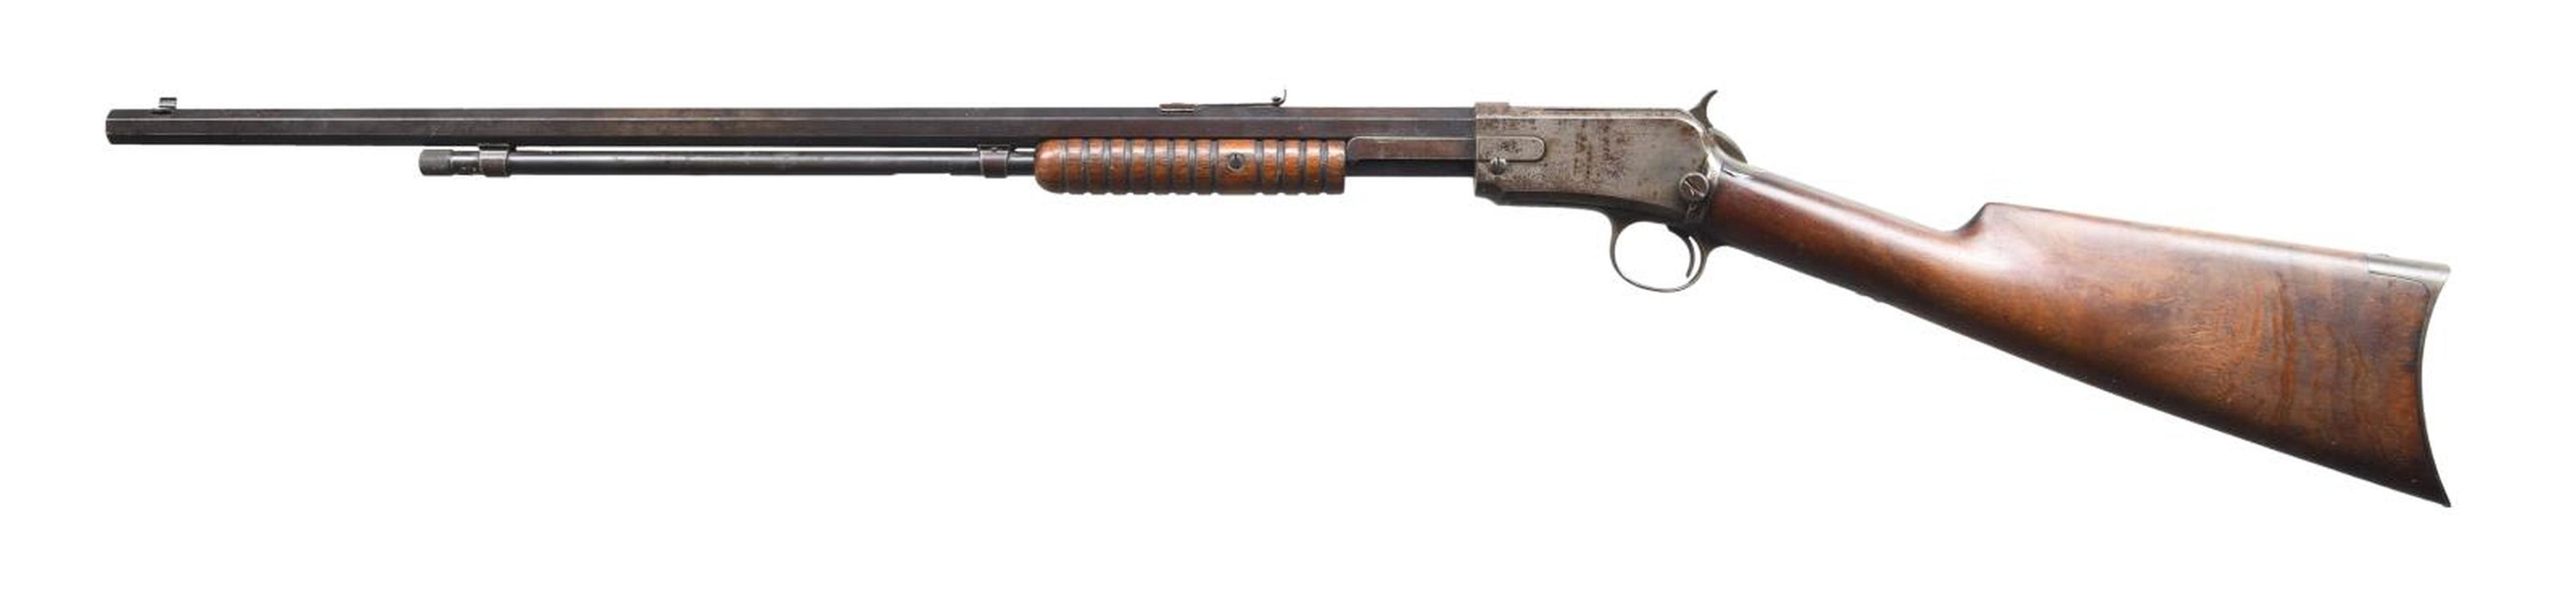 WINCHESTER EARLY 2ND MODEL 1890 PUMP RIFLE.